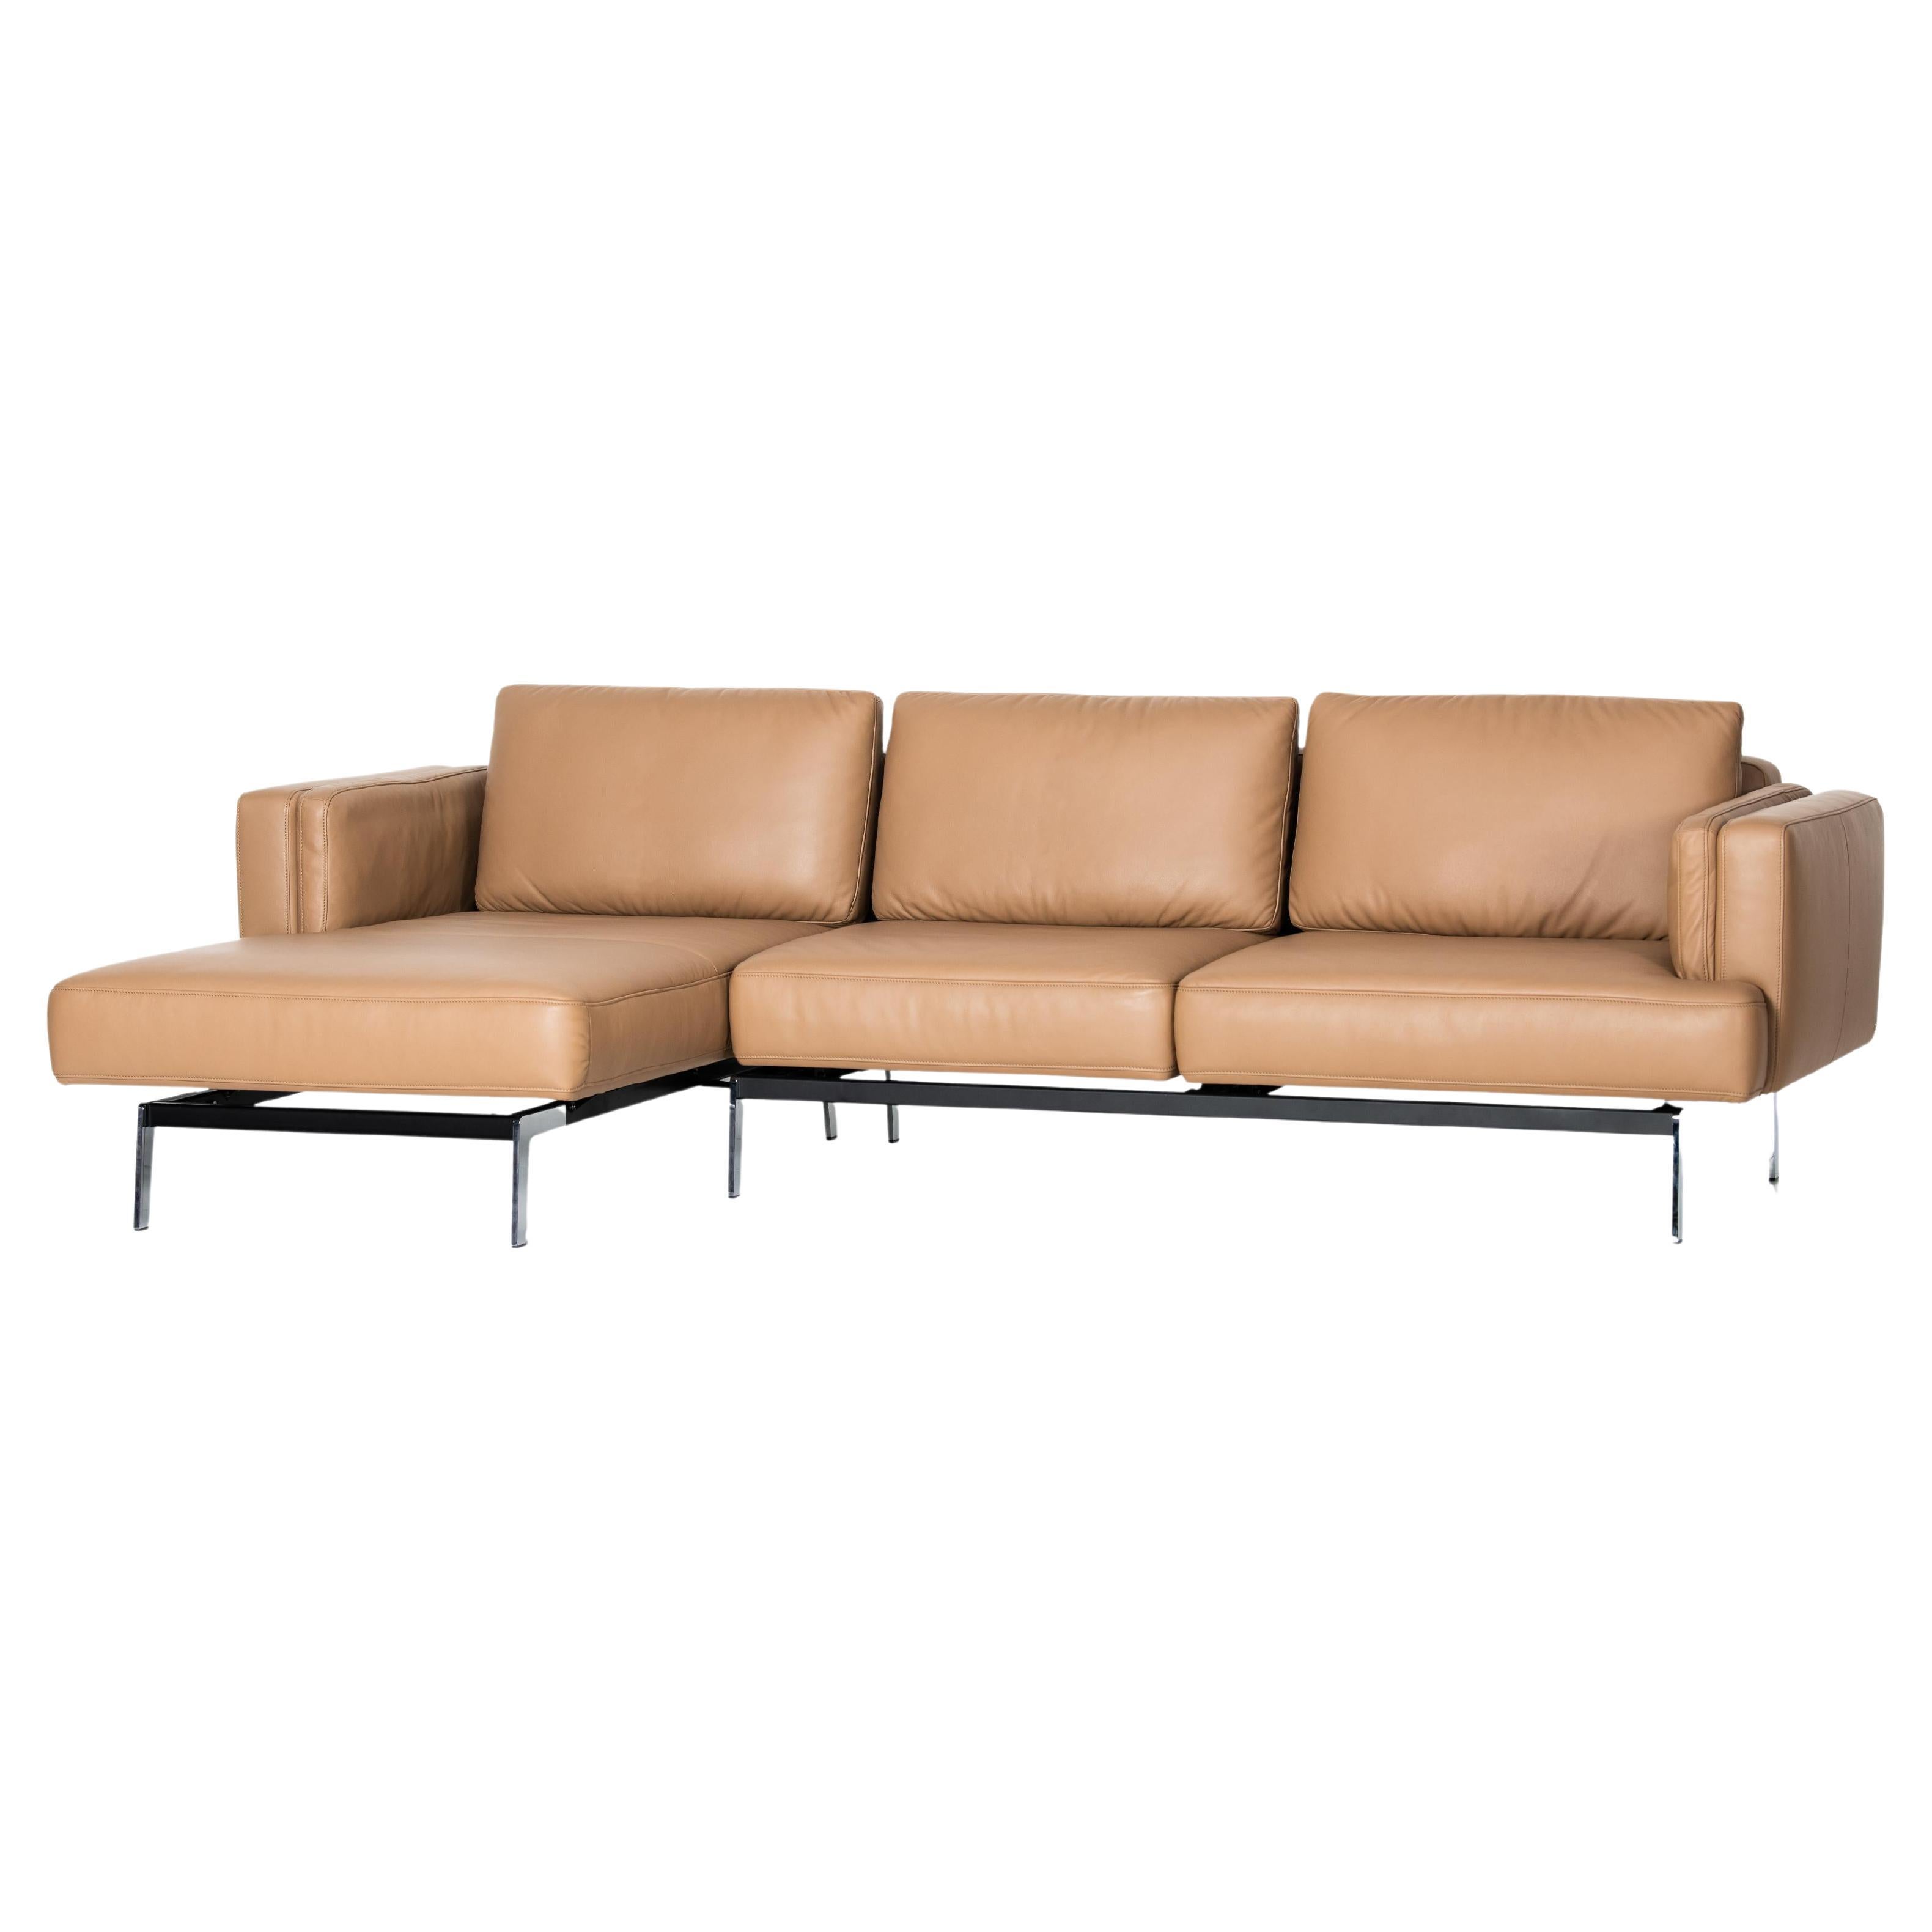 DeSede DS-747/40 Multifunctional Sofa in Noce Leather Seat and Back Upholstery For Sale